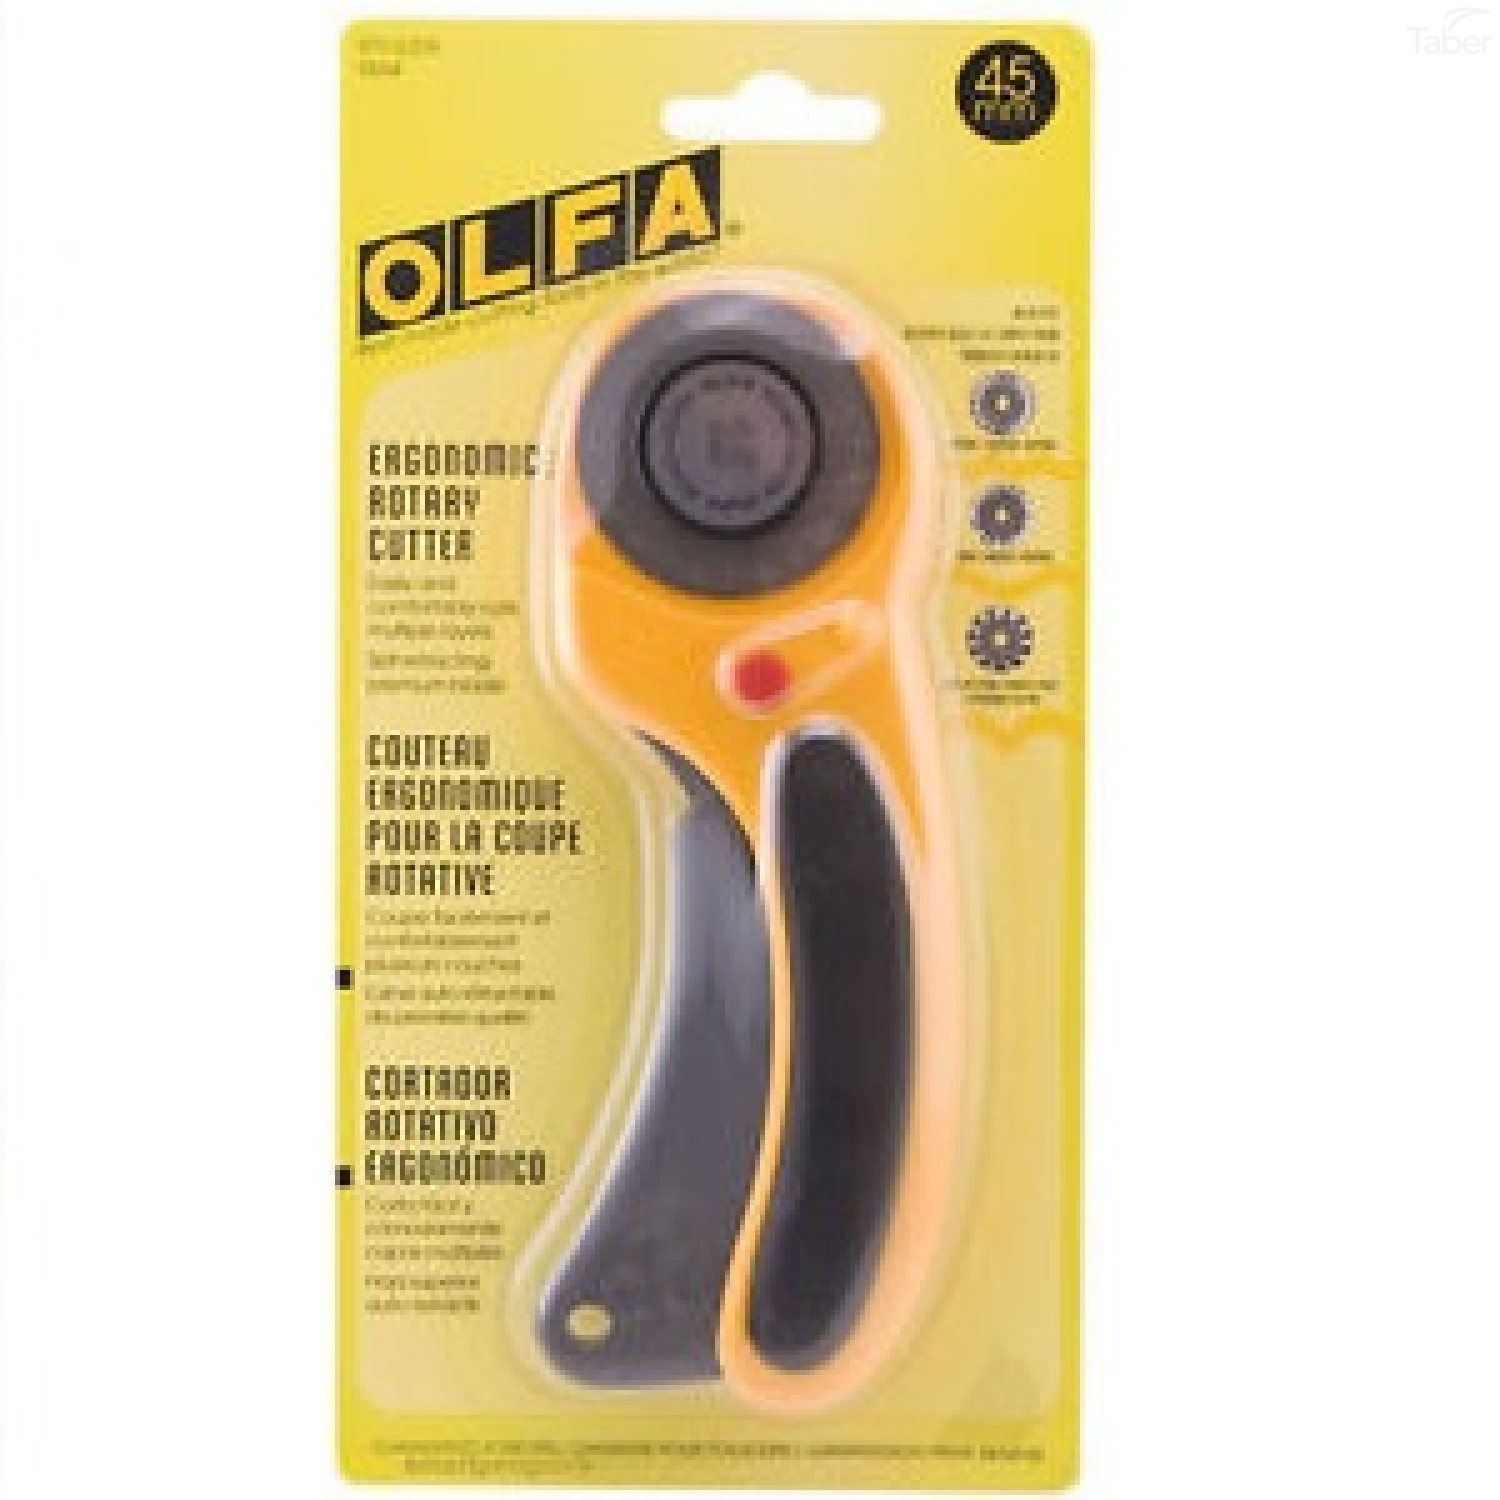 Olfa Deluxe 45mm Rotary Cutter Model 9654 